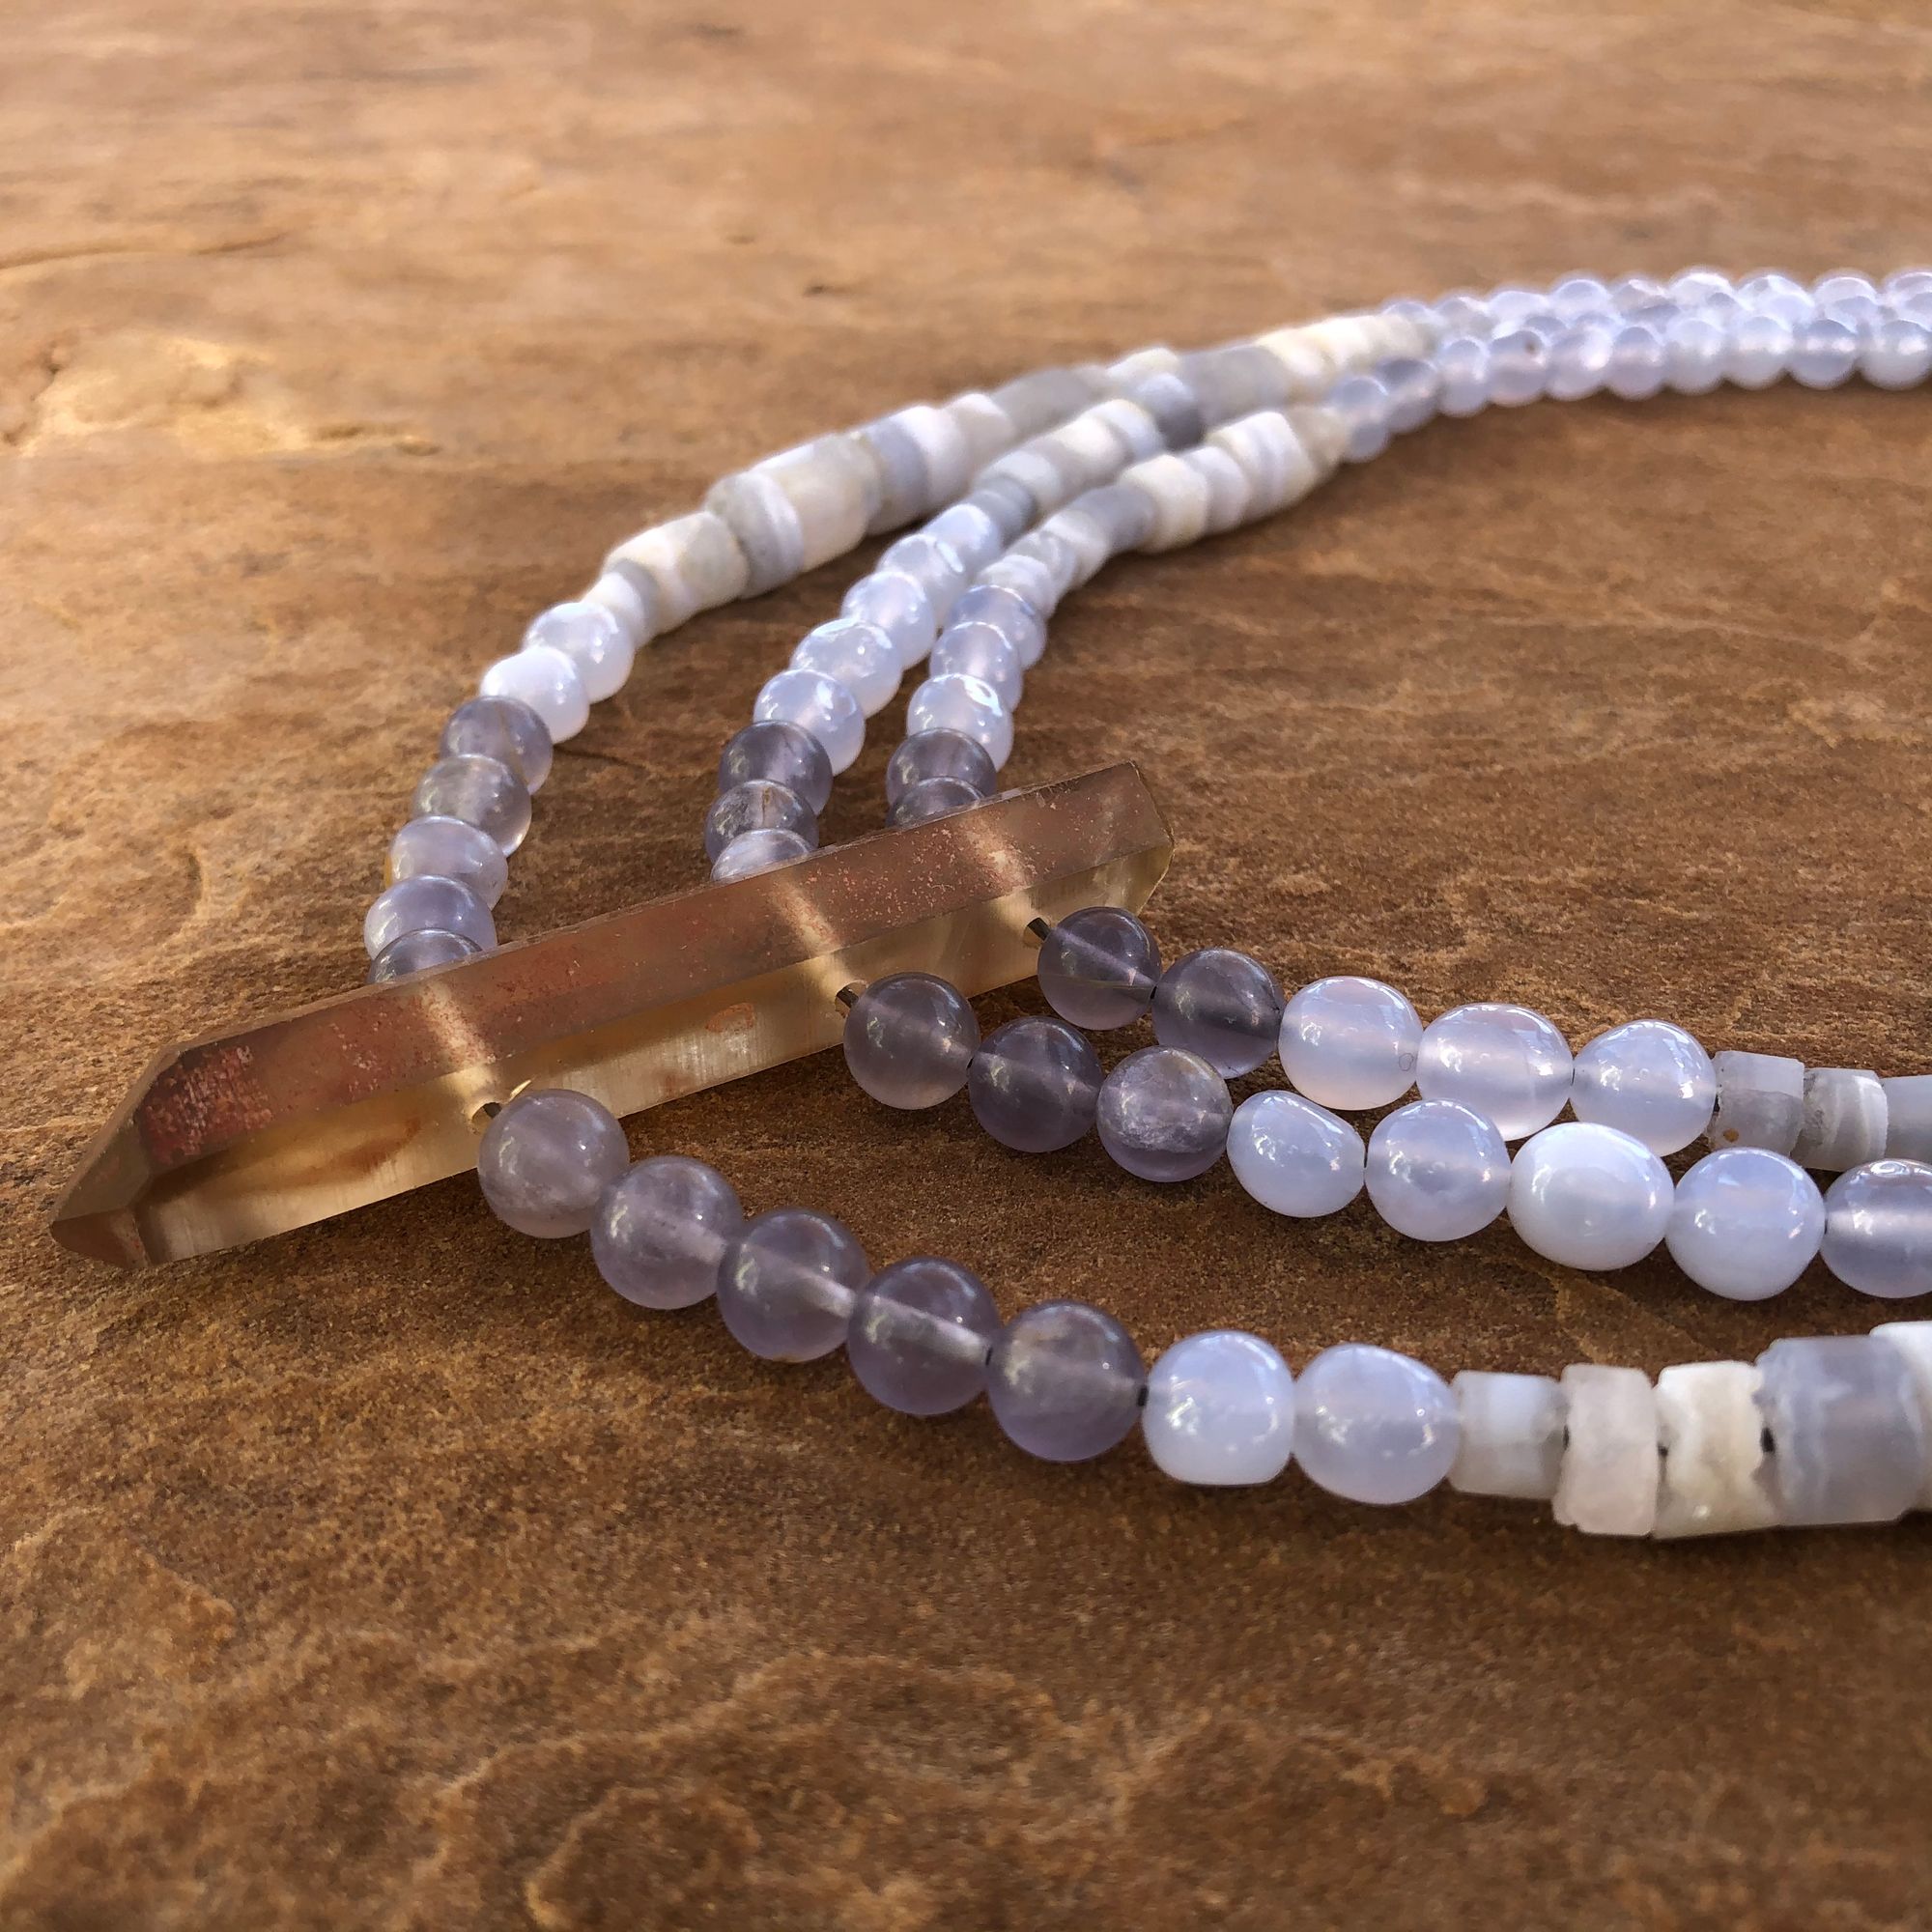 Blue chalcedony and golden Zambian citrine necklace laying flat on a tan stone